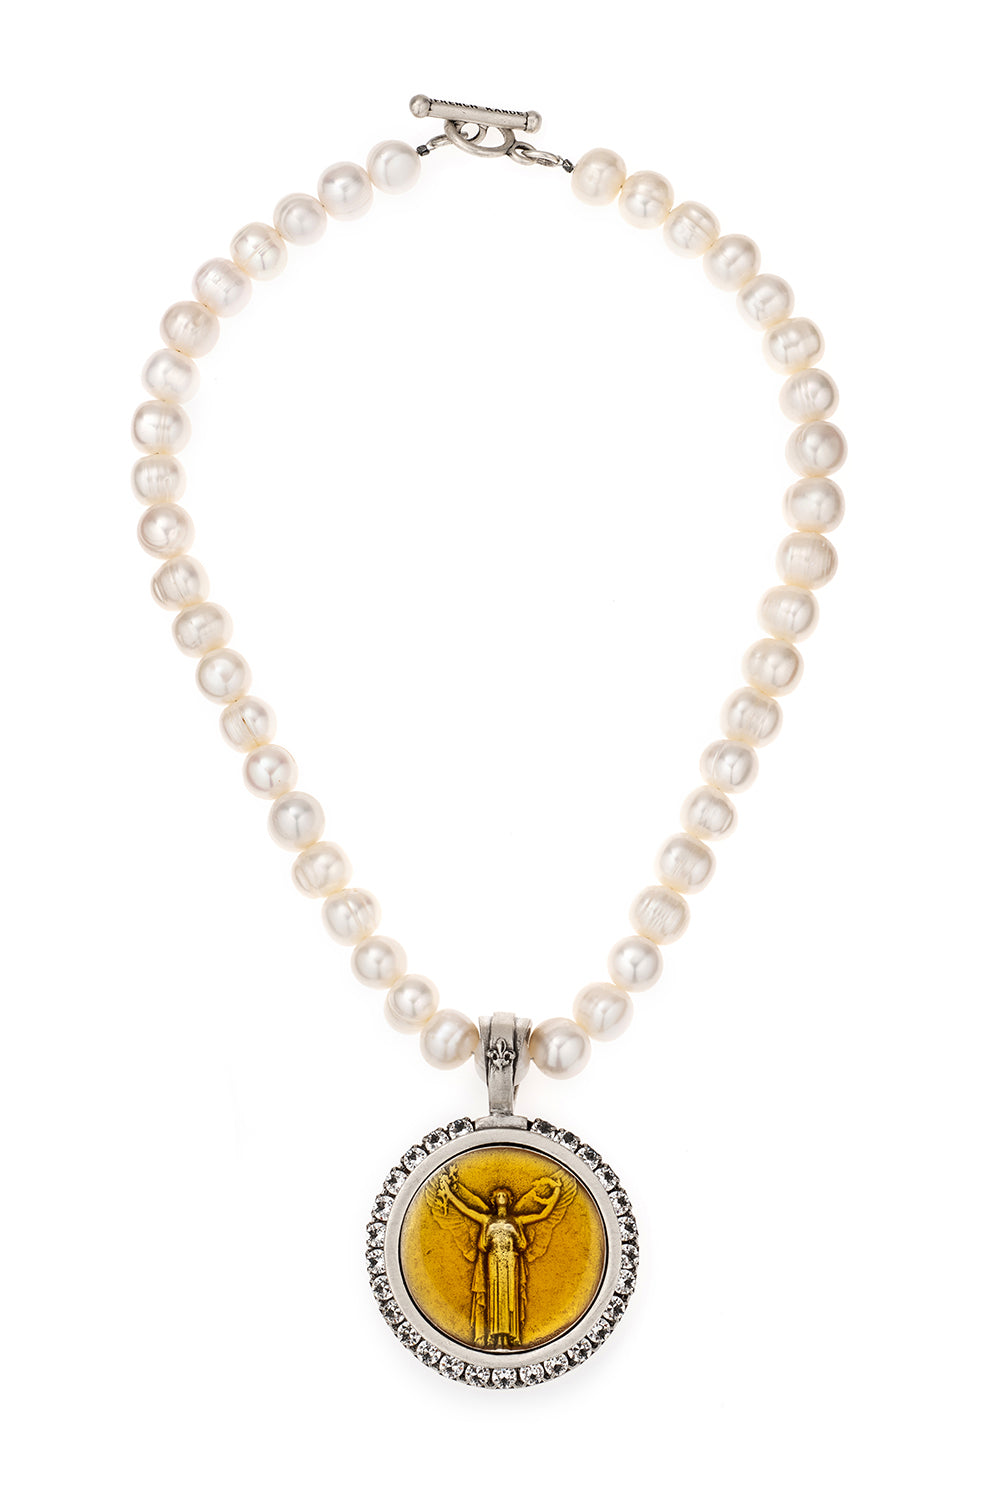 PEARLS WITH ENAMEL CIVILIZATION MEDALLION AND AUSTRIAN CRYSTAL